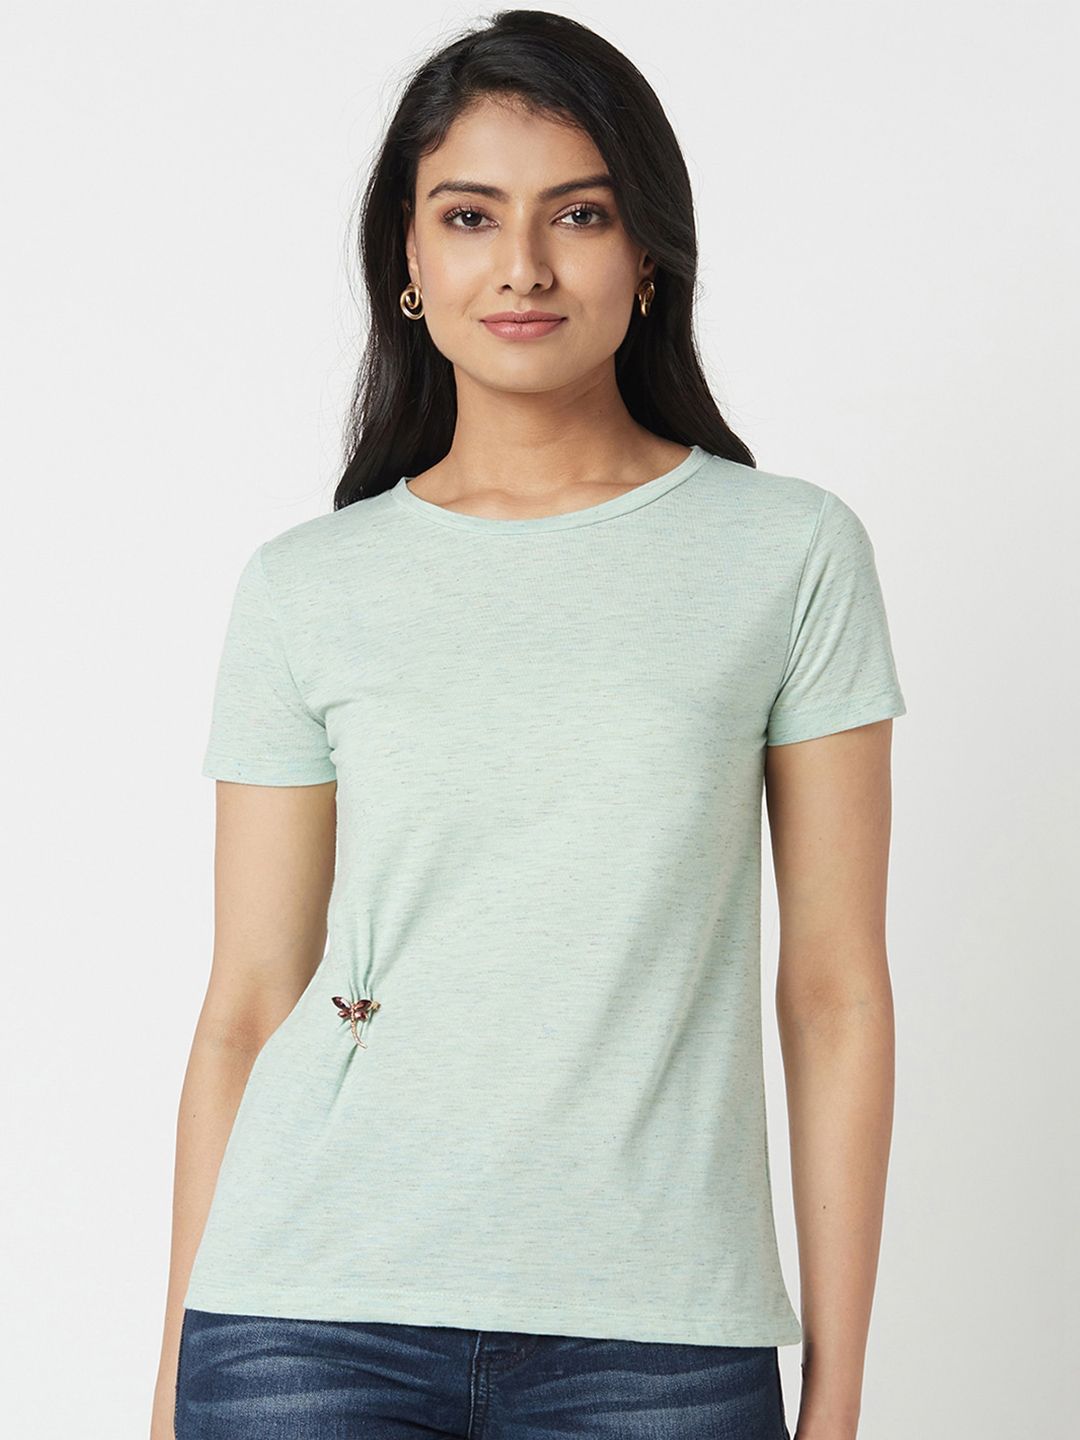 Miss Grace Boat Neck Short Sleeves Top Price in India